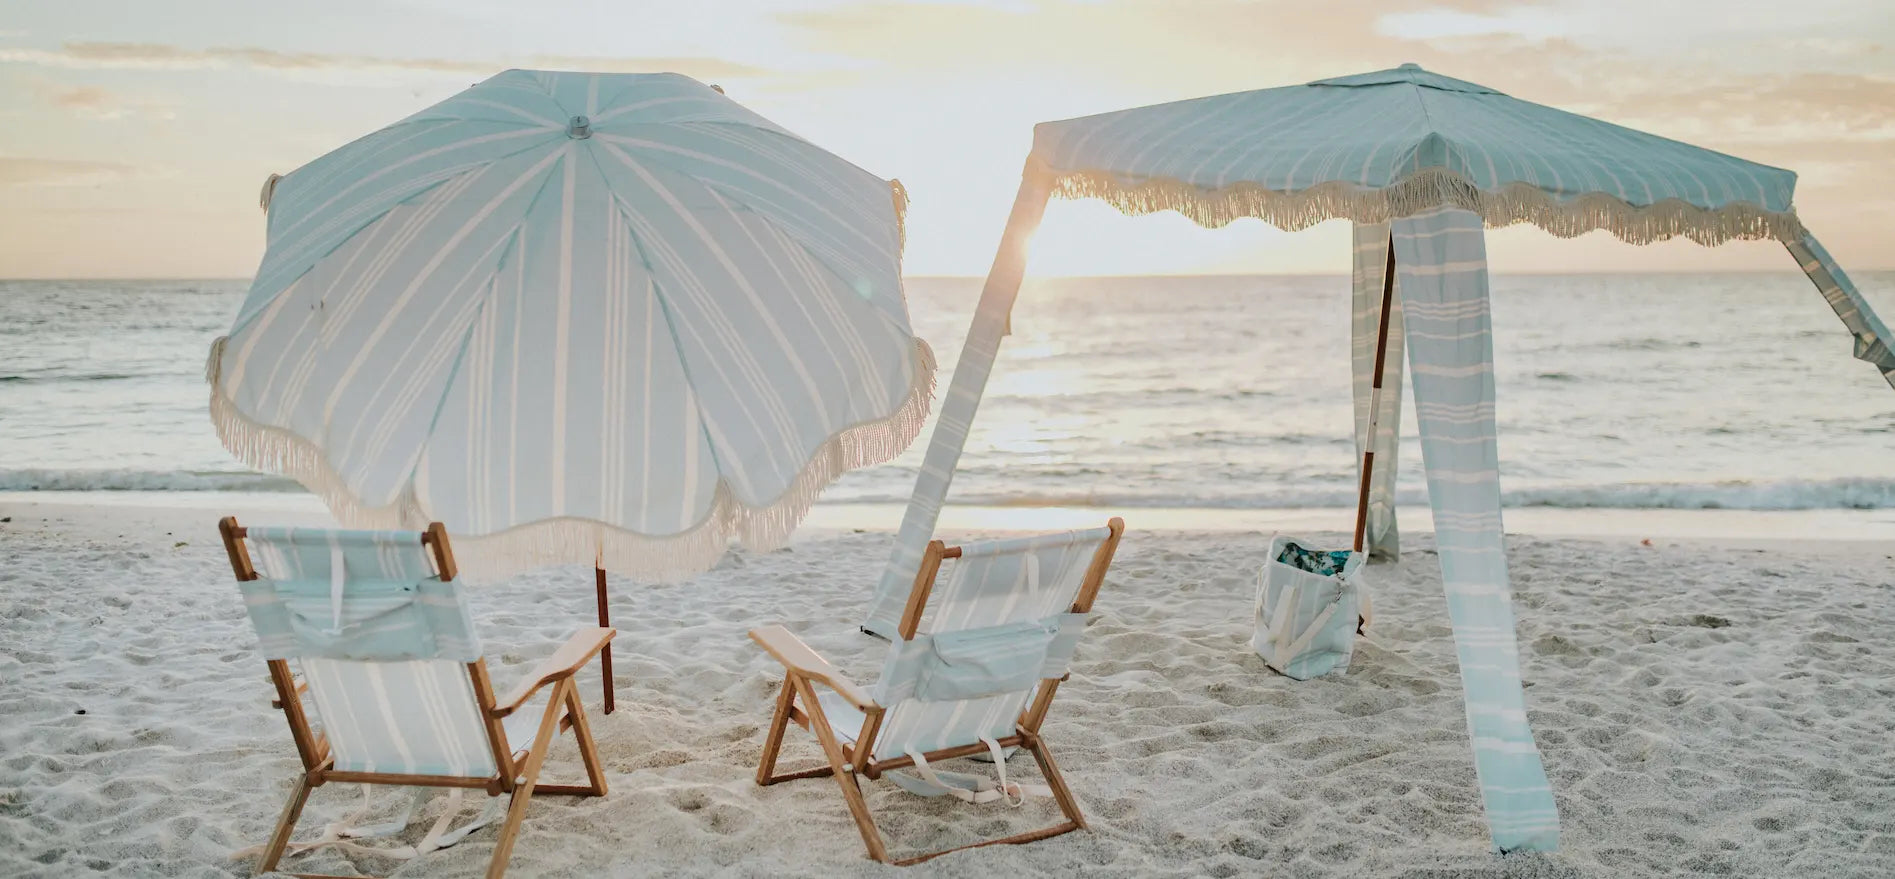 Blue striped umbrella, chair, cooler tote and cabana on the beach during sunset